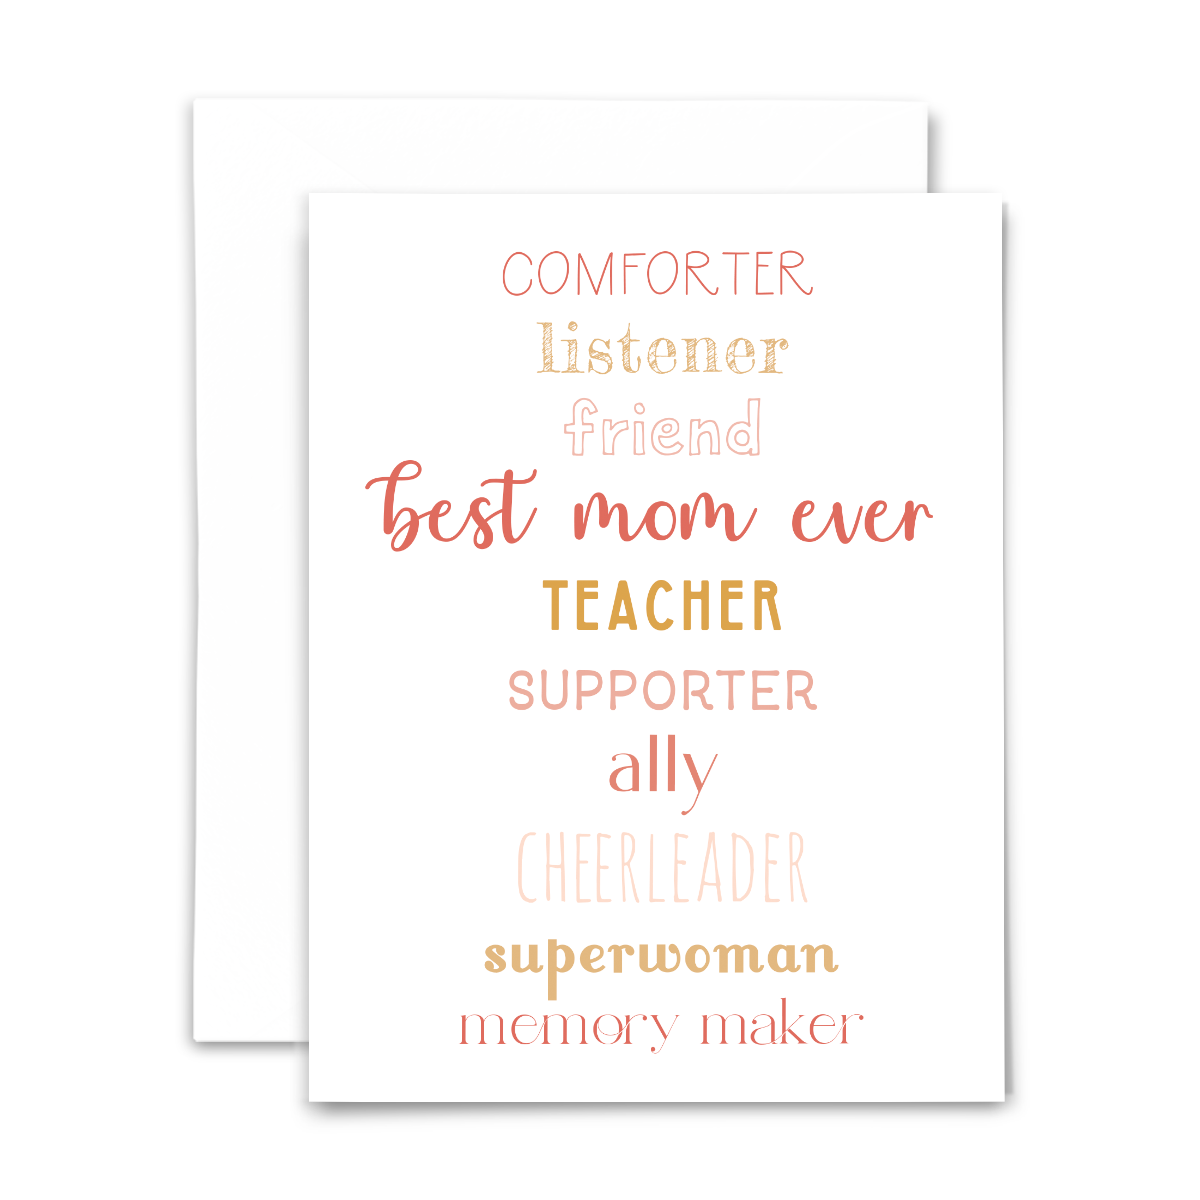 Best mom ever greeting card with blank interior; all the roles mom plays (listener, friend, ally, cheerleader, etc) spelled out in pink, coral and gold fonts on white background; with white envelope